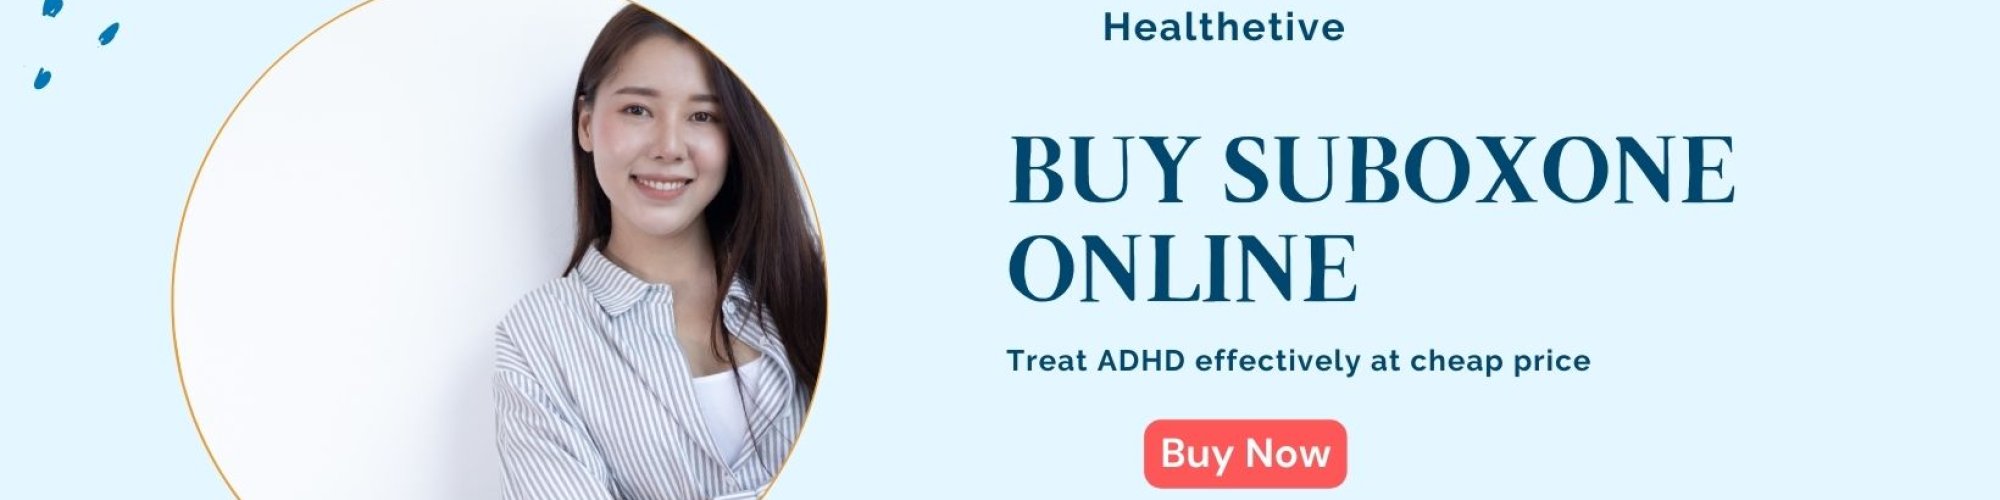 Can you Buy Suboxone Online without prescription? | Order Suboxone Online - Buy Suboxone Online 